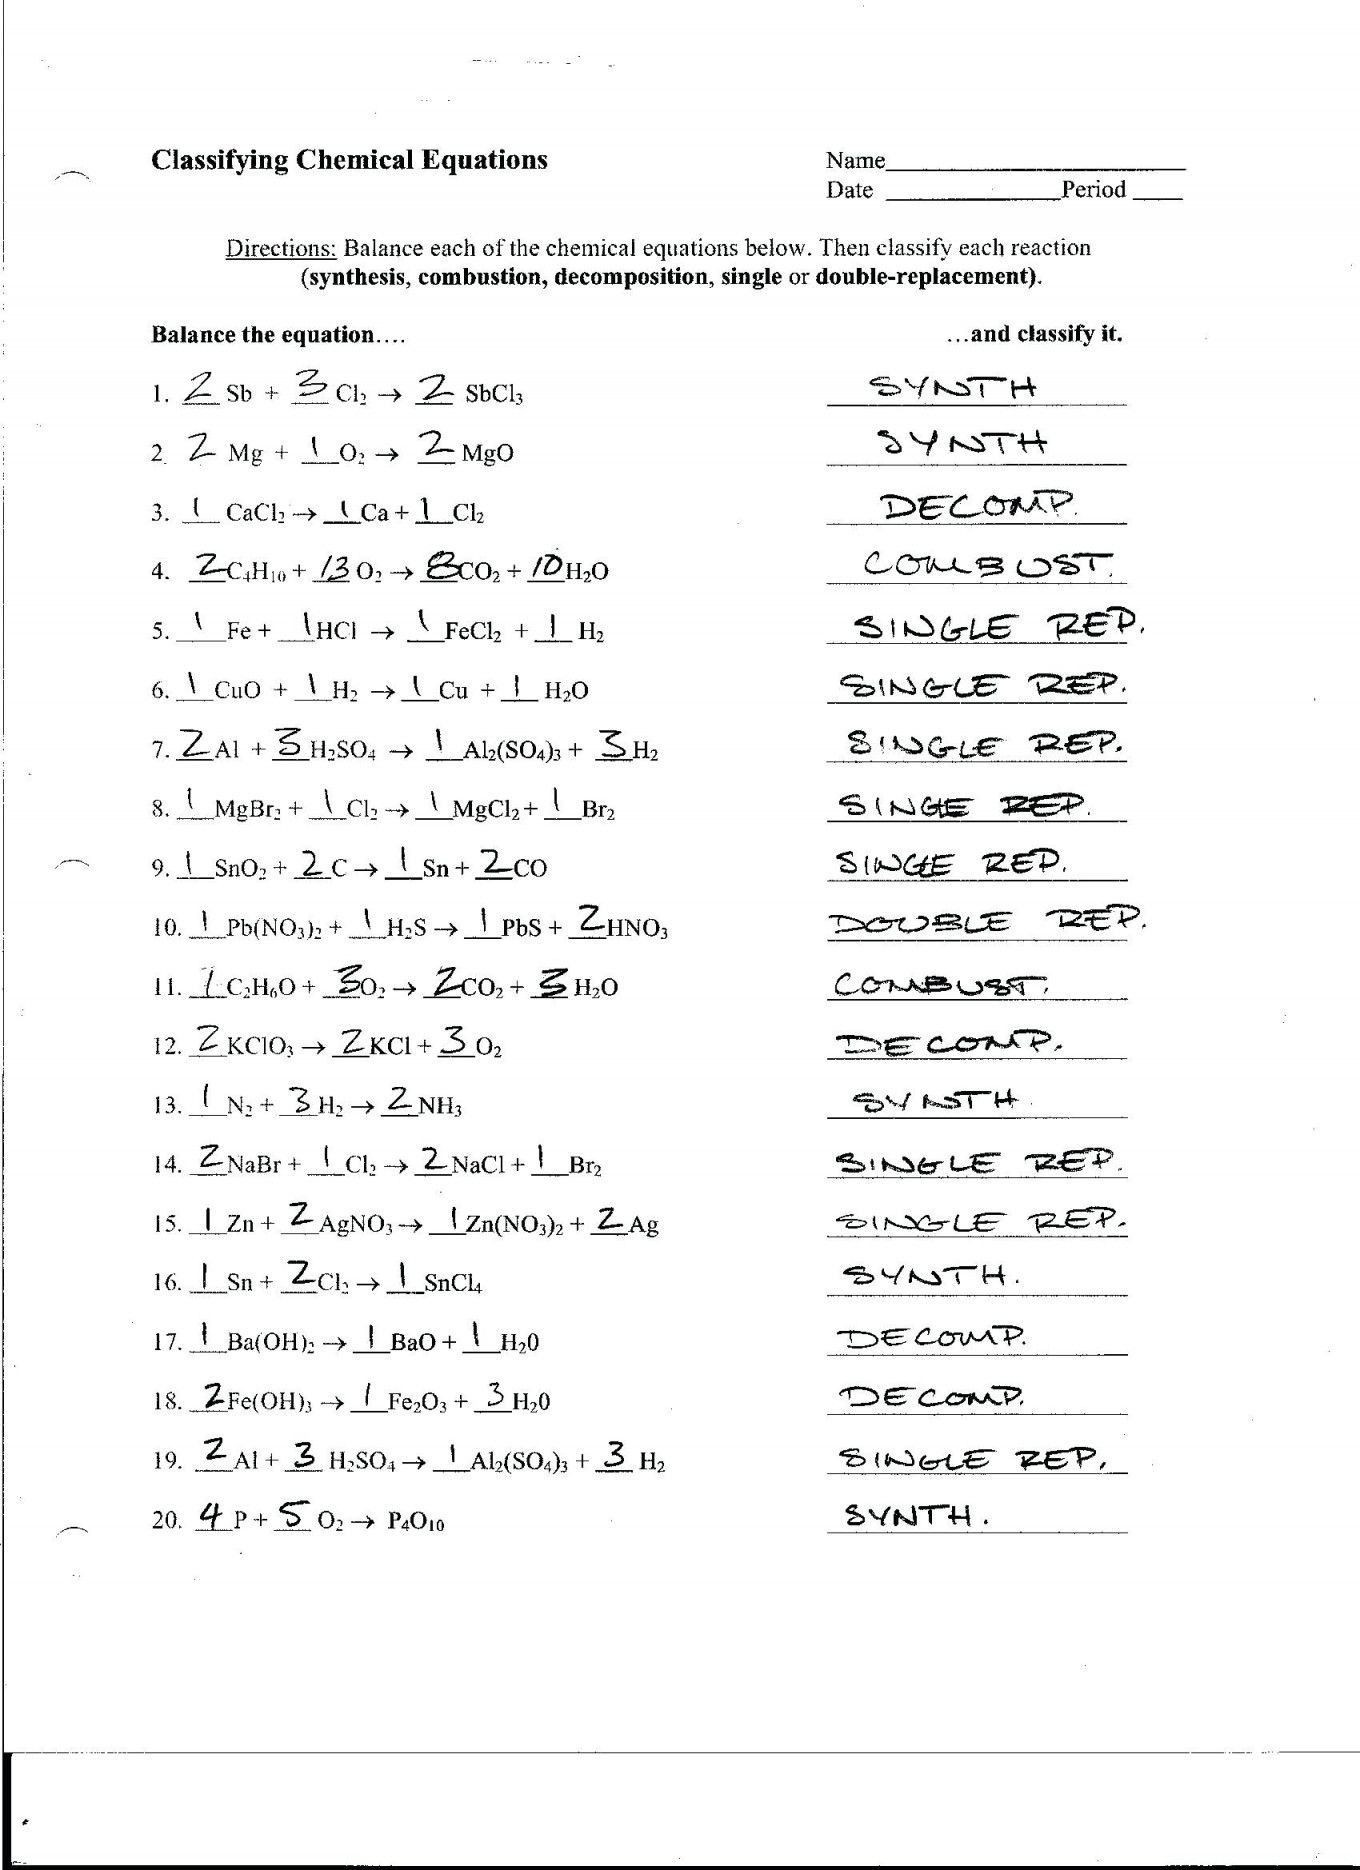 Nuclear Equations Worksheet Answers Chemistry Worksheet Balancing Nuclear Equations Answers